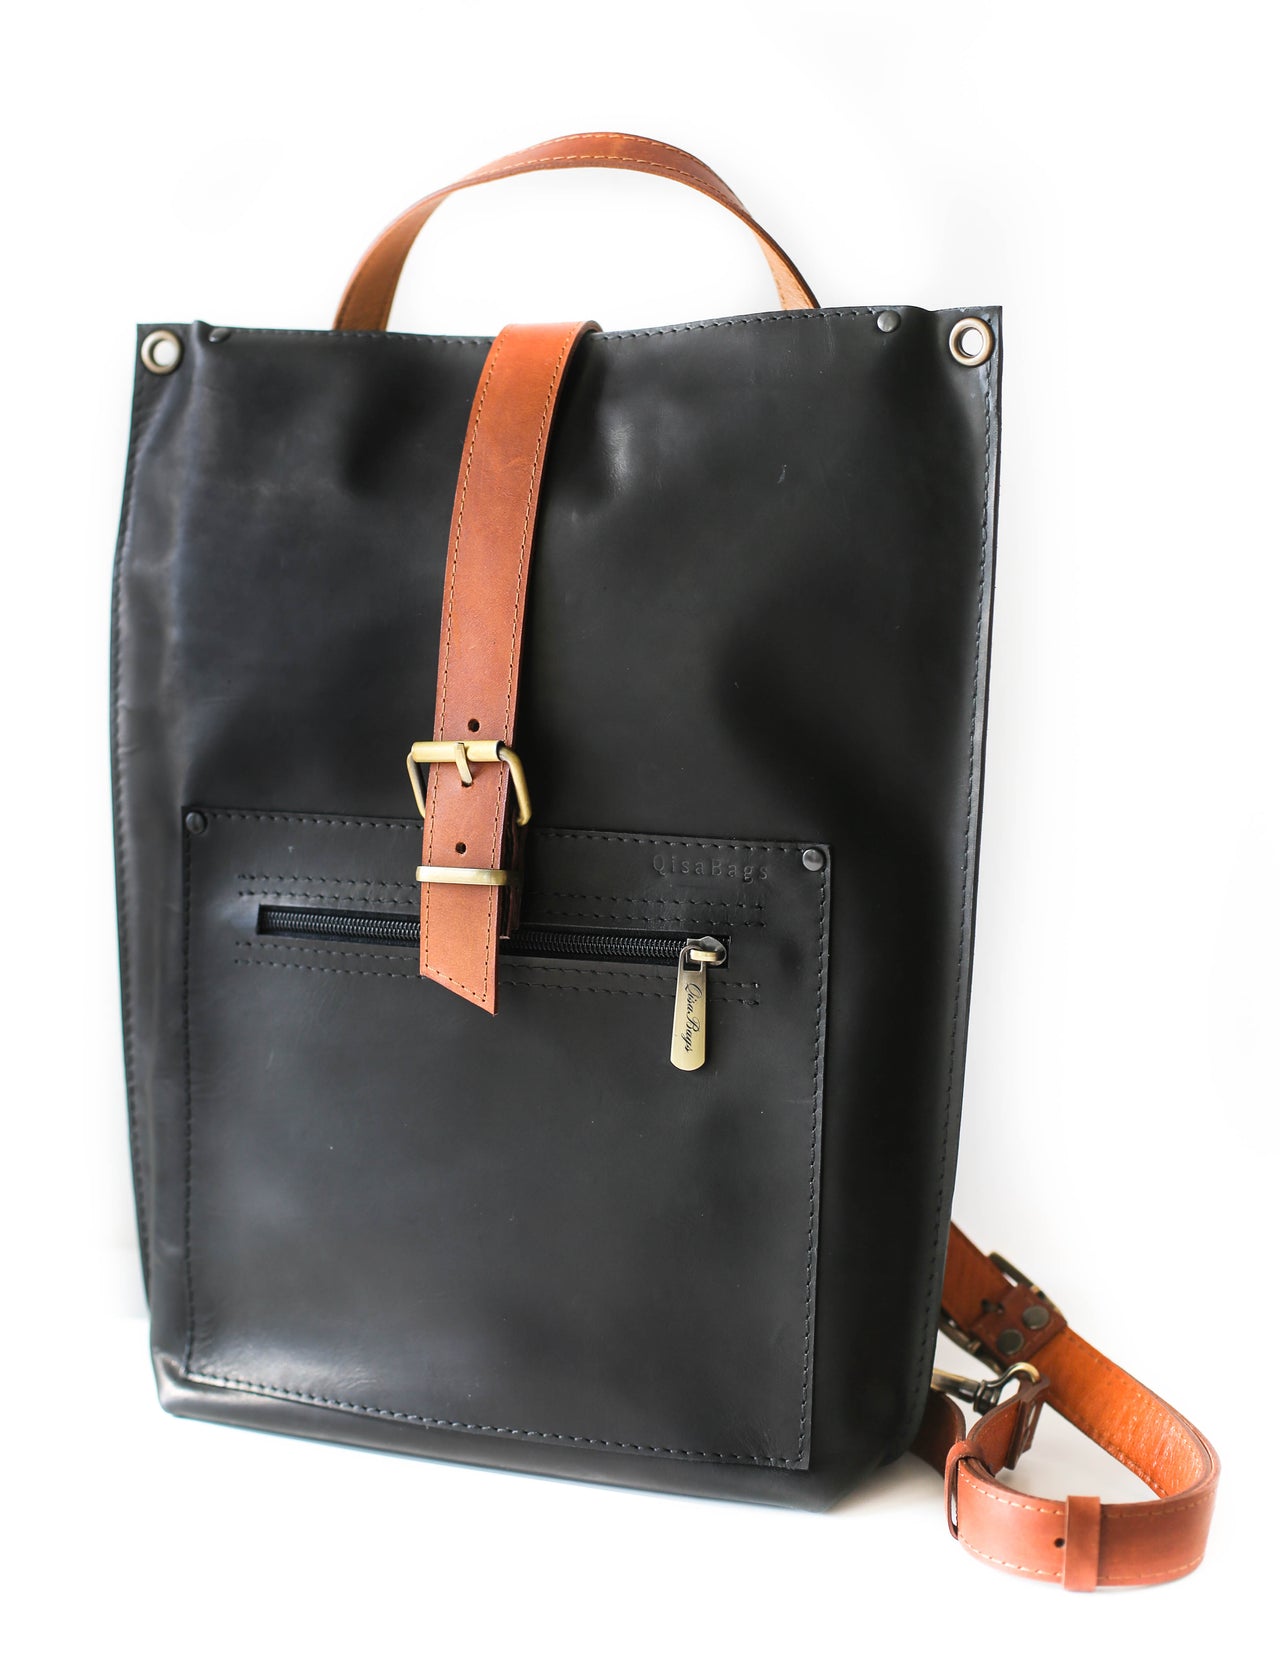 Black Leather backpack with zipper closure